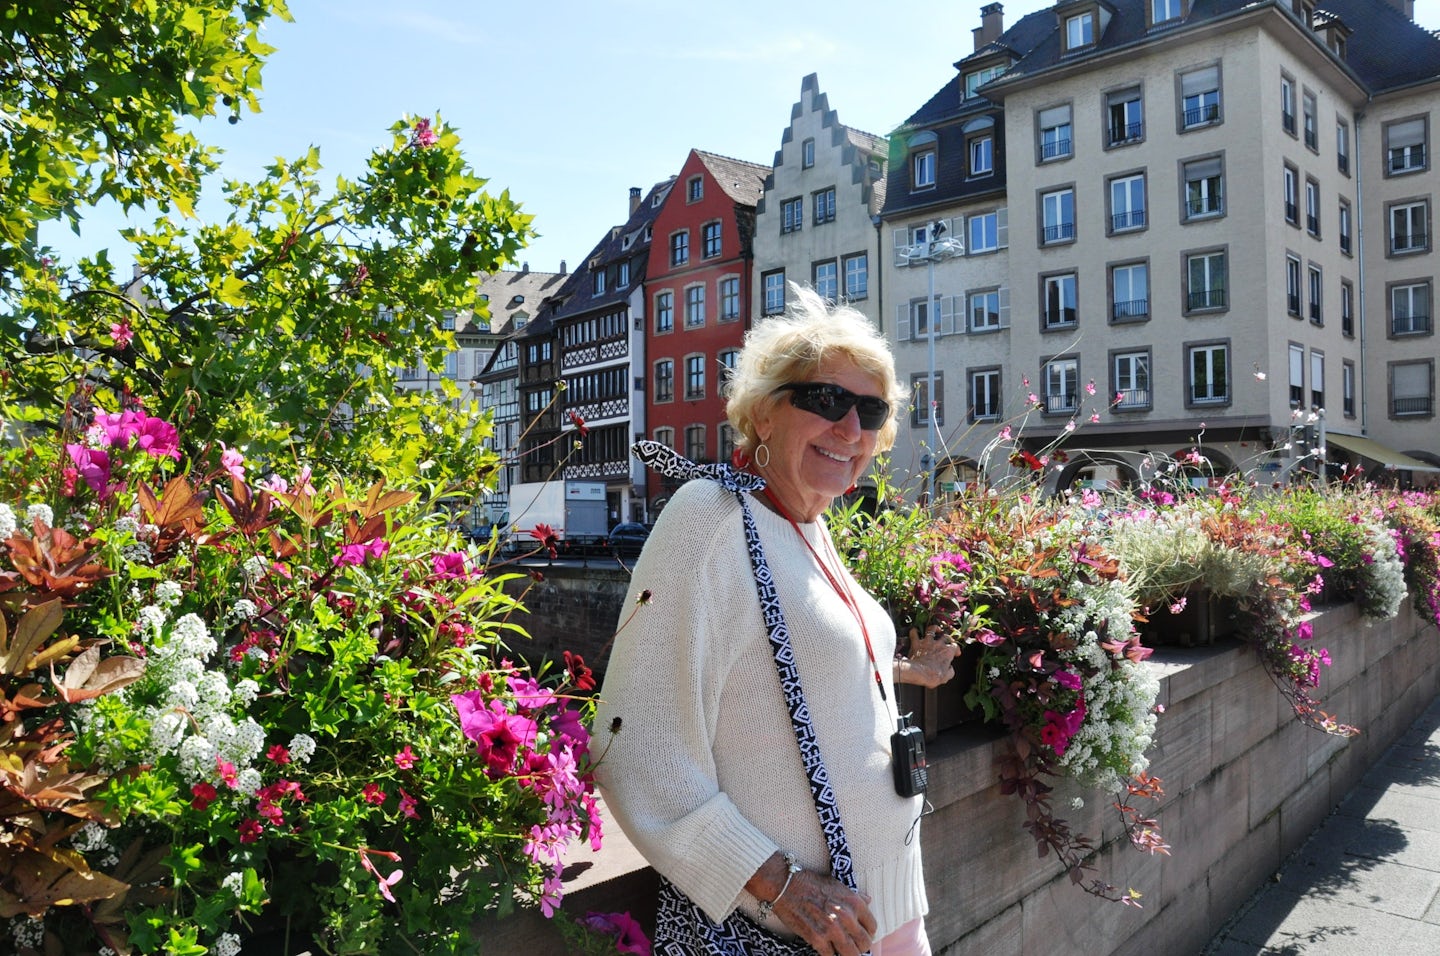 My wife while in Strasbourg, France